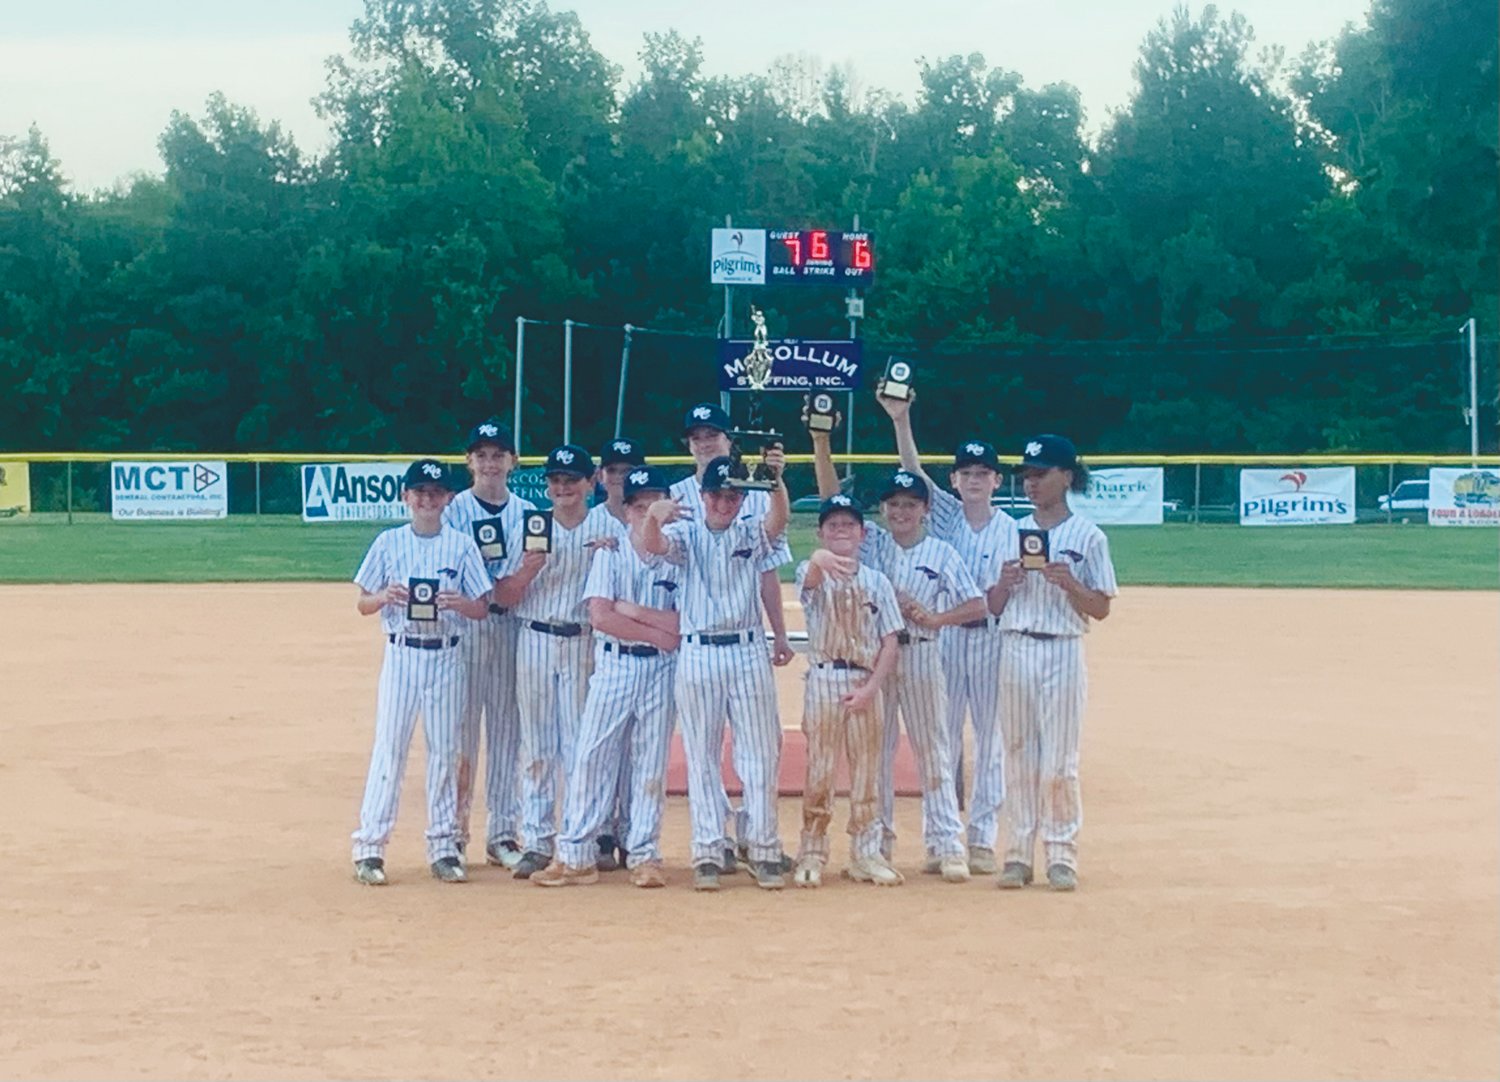 The West Chatham 12U All-Stars pose for photos holding their trophies after winning the N.C. Dixie Youth District 1 O-Zone championship on June 22. With the win, West Chatham moves on to the Dixie Youth state tournament in early July.